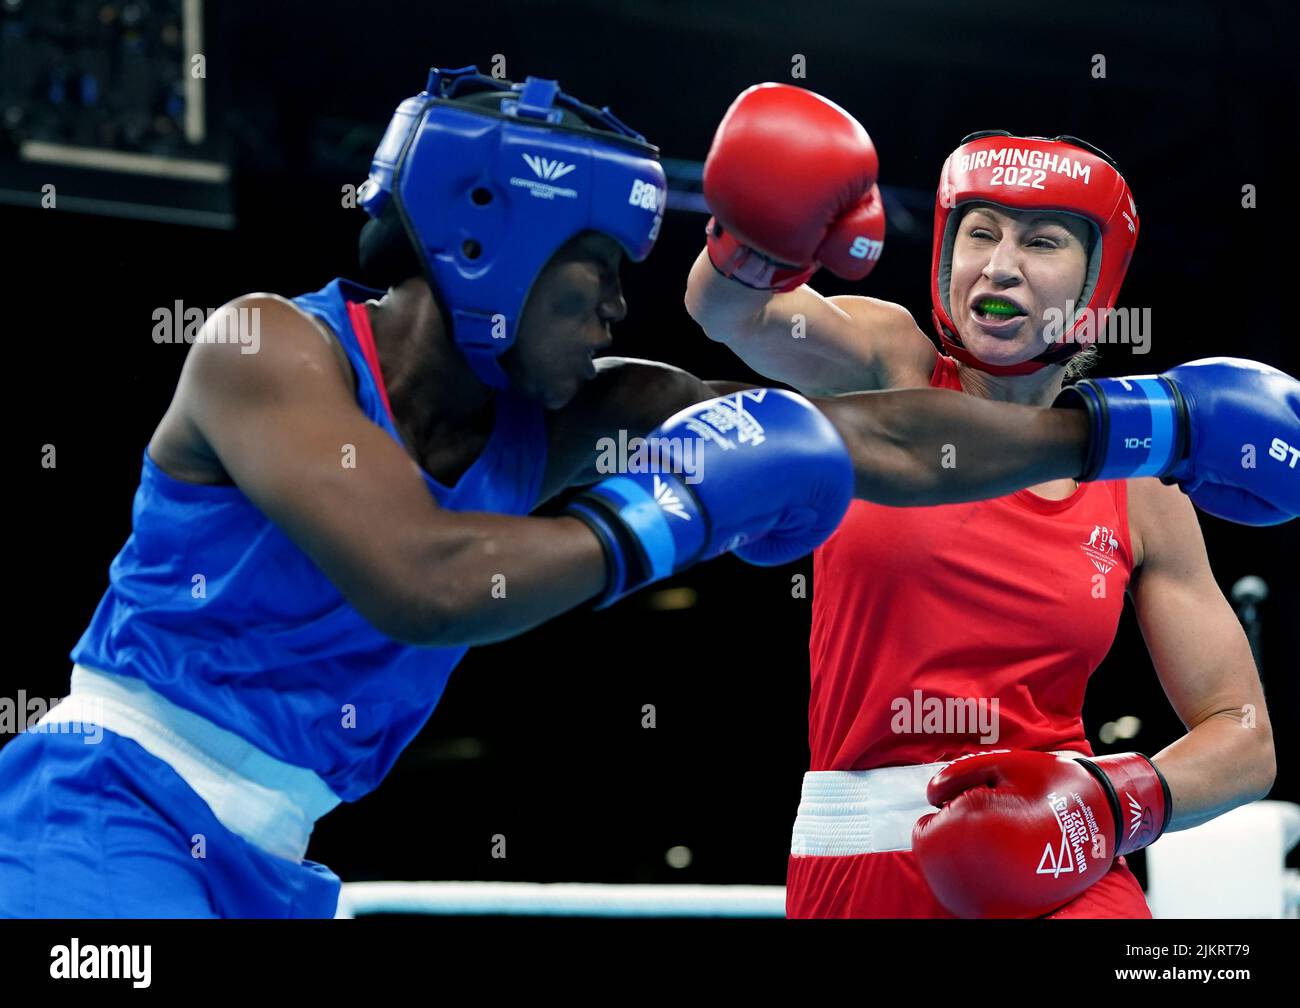 Australia's Kaye Frances Scott (right) on her way to victory in the Women's Over 66kg-70kg (Light Middle) - Quarter-Final 2 bout against Sierra Leone's Zainab Keita at The NEC on day six of the 2022 Commonwealth Games in Birmingham. Picture date: Wednesday August 3, 2022. Stock Photo